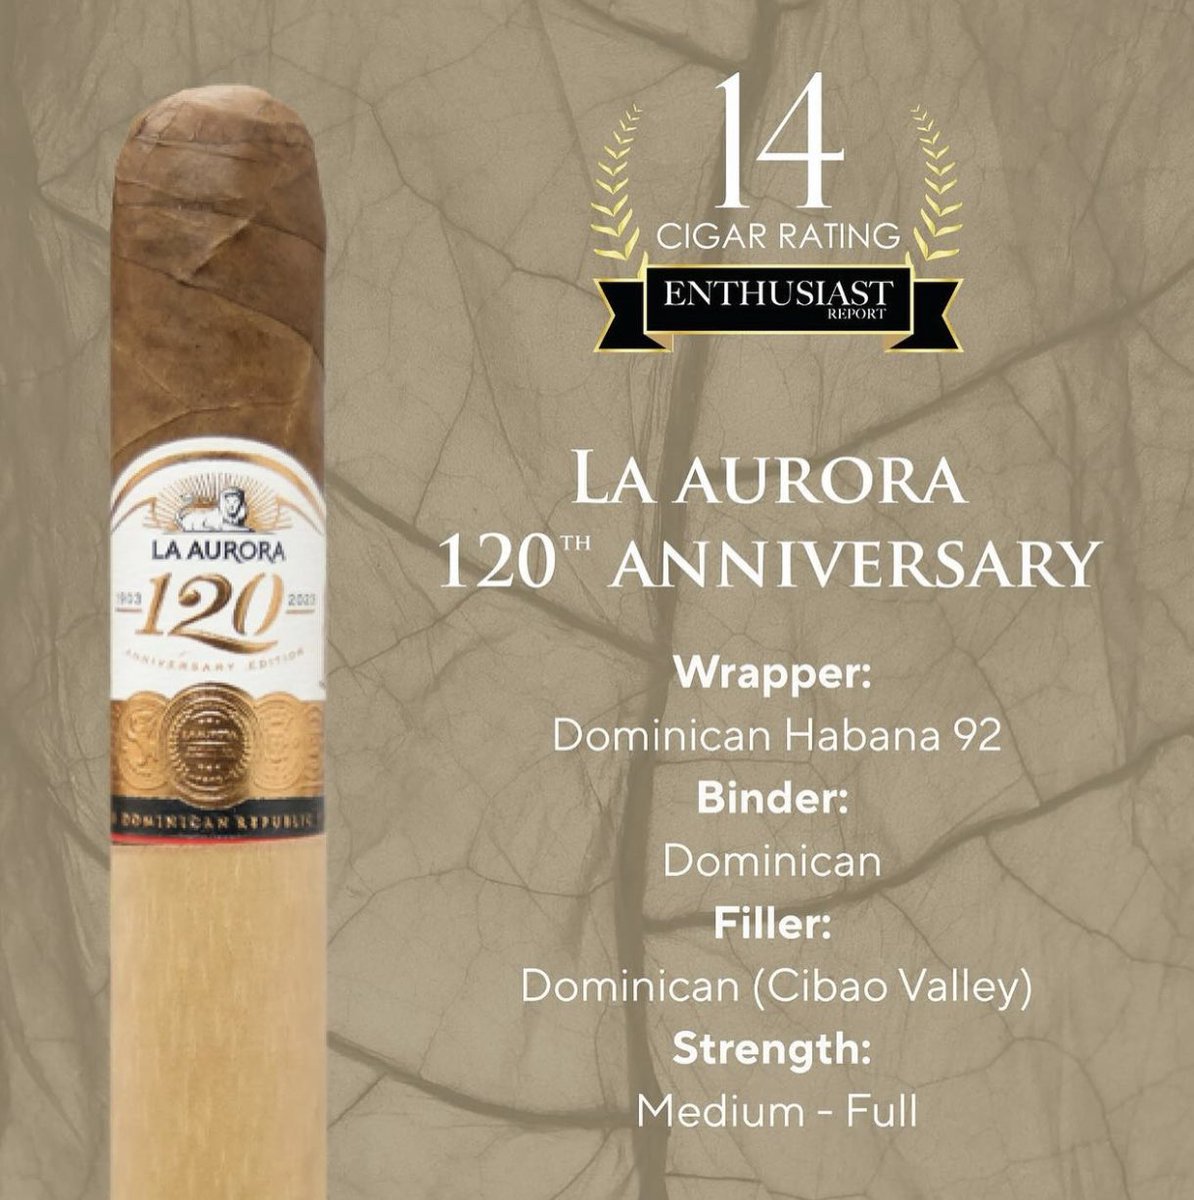 La Aurora 120th Anniversary #Cigar is honored to be ranked #14 in the “Top 20 Cigars of 2023 in the World” by Enthusiast Report Magazine. We’re thrilled that our 120th Anniversary Cigar has been recognized among the best! 🏆
#LaAuroraCigars #DominicanDefined #cigars